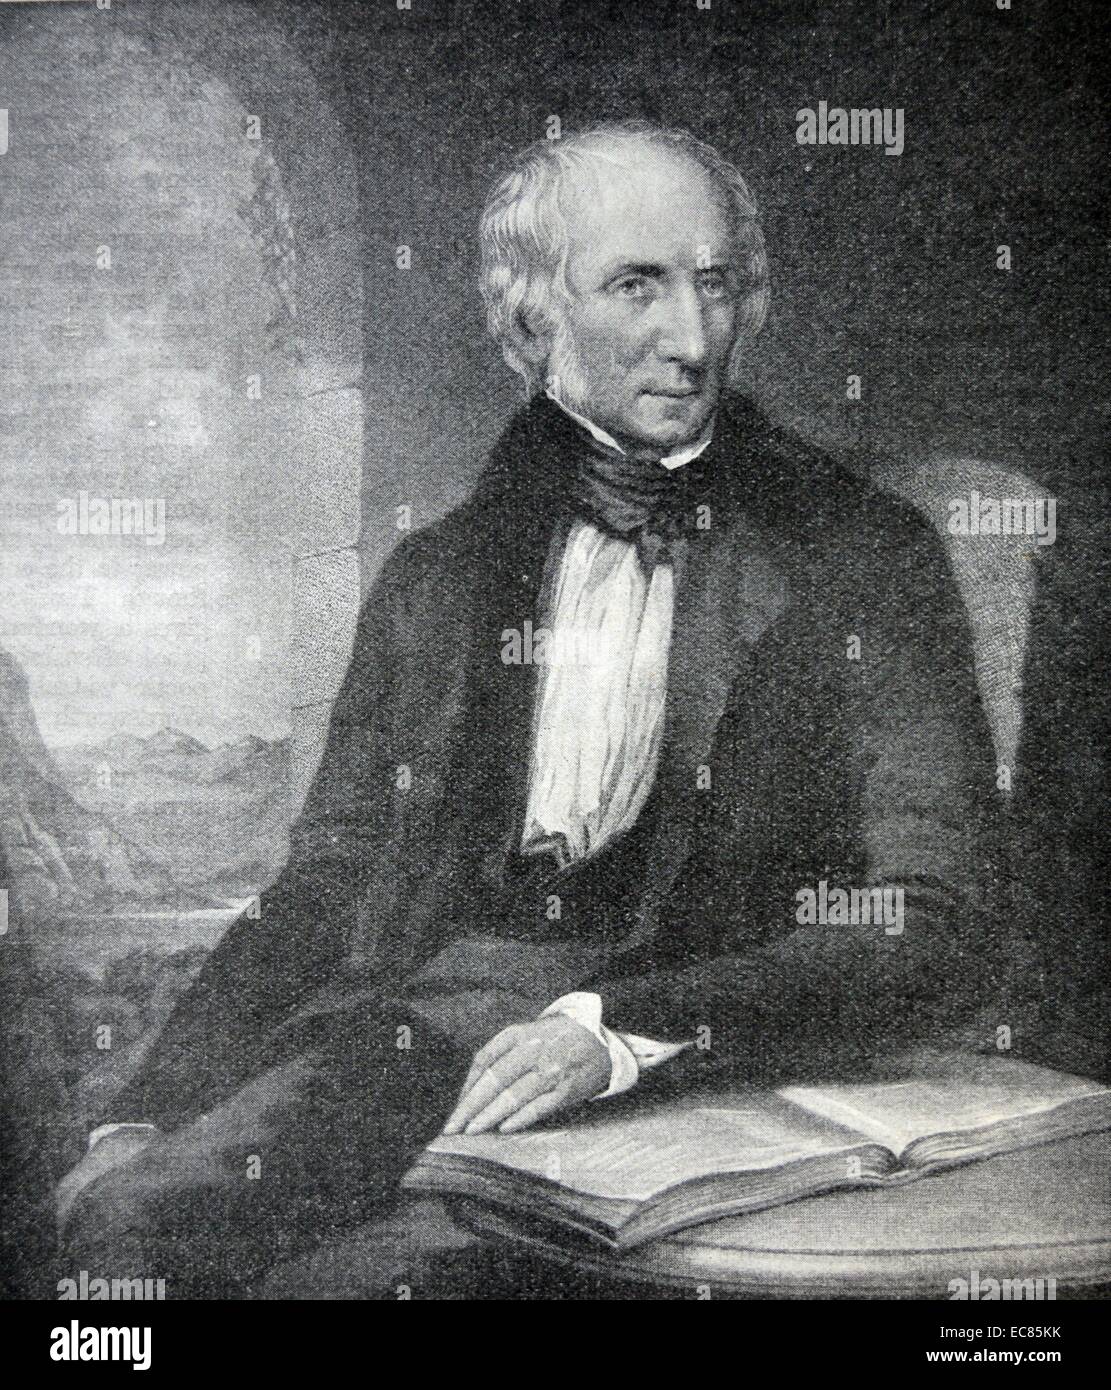 Portrait of William Wordsworth (1770-1850) was a major English Romantic poet who, with Samuel Taylor Coleridge, helped to launch the Romantic Age in English literature with the 1798 joint publication Lyrical Ballads. Dated 16th century. Stock Photo